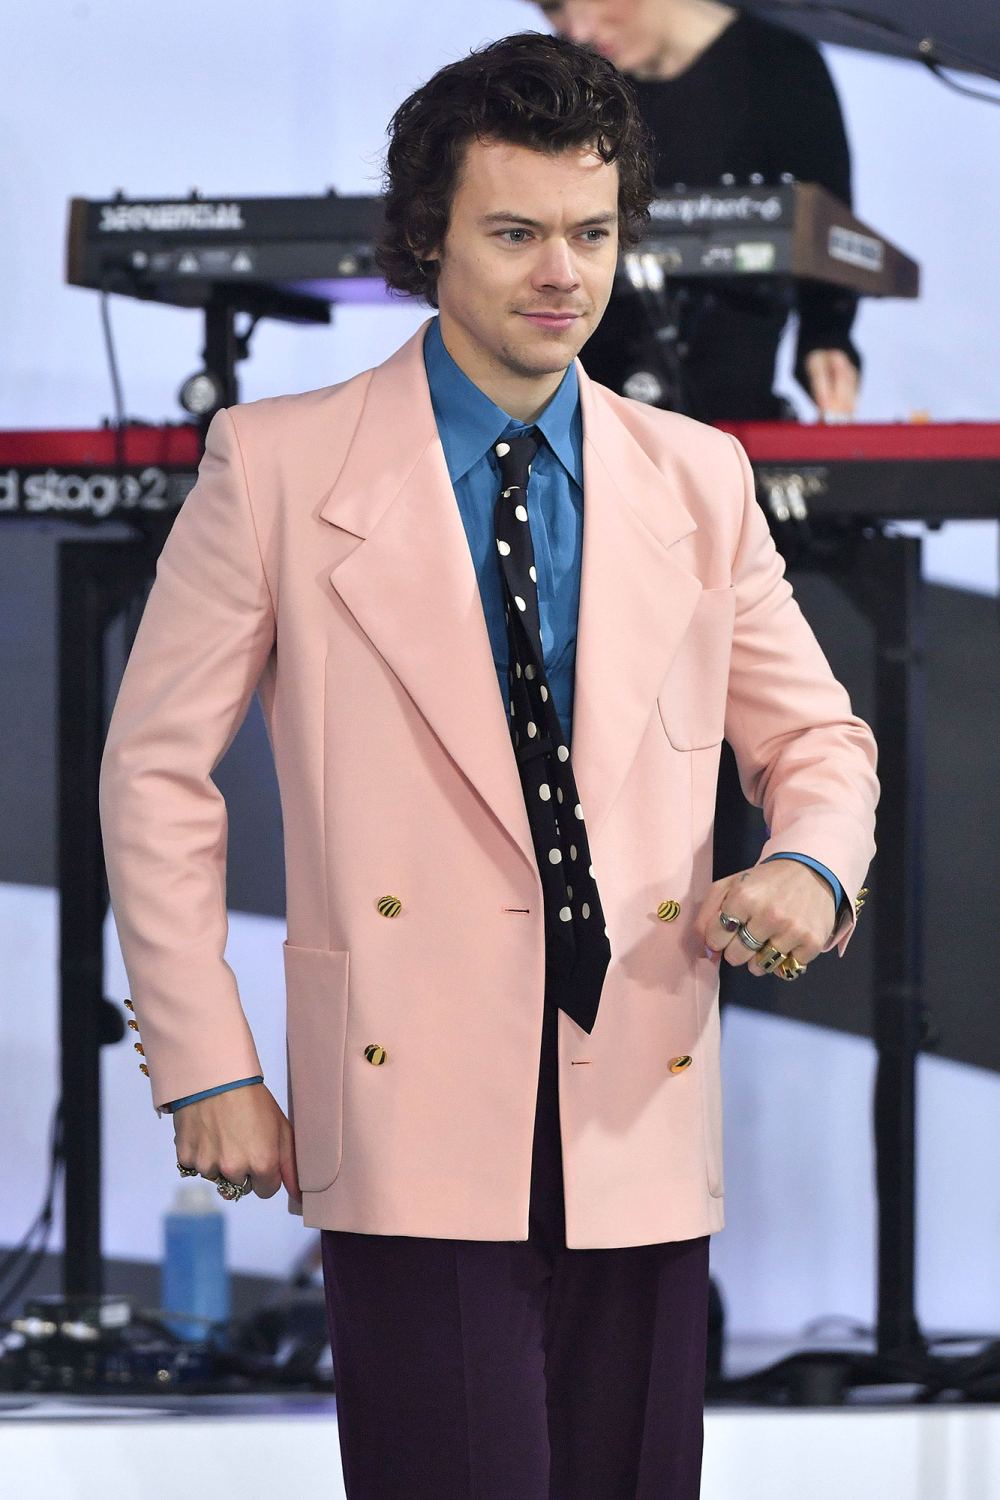 Harry Styles Reveals Identity of Baby Voice in His As It Was Music Video